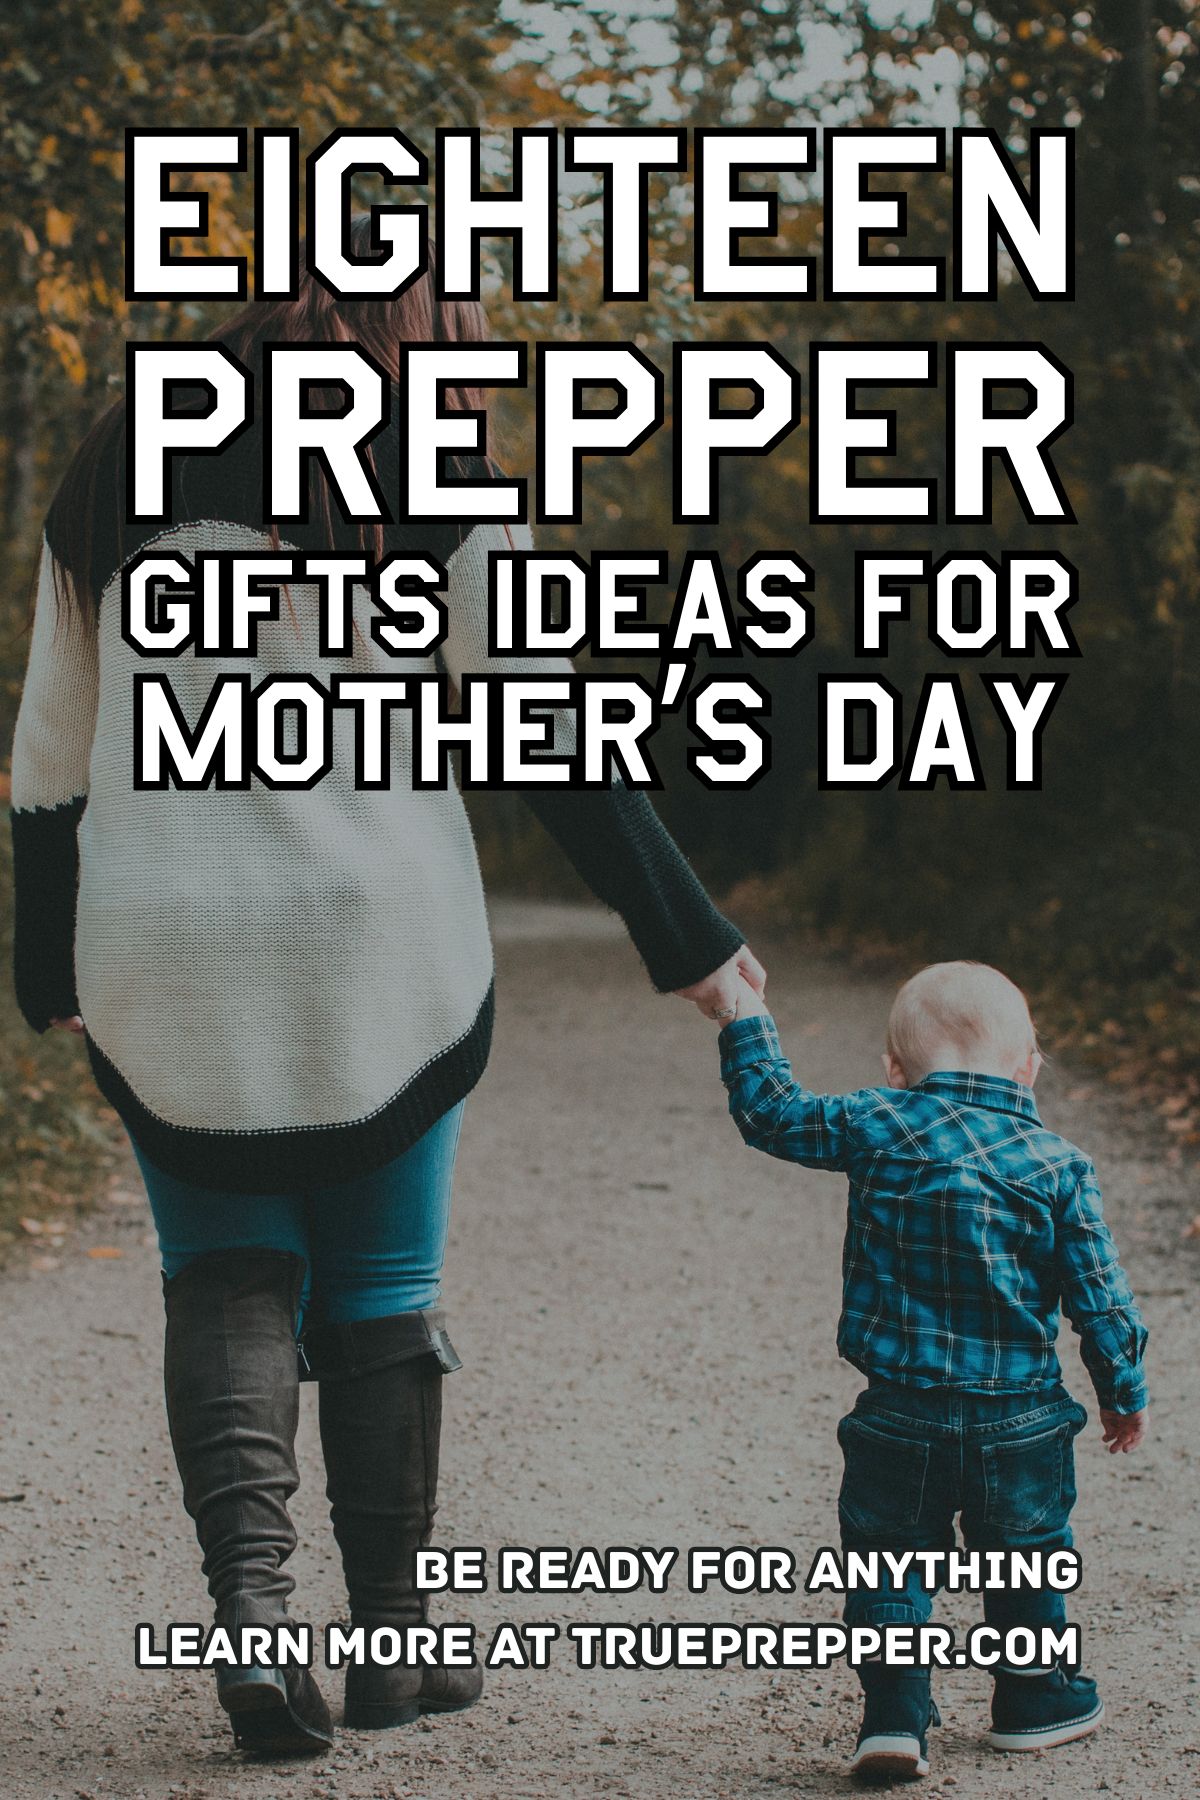 18 Prepper Gift Ideas for Mother's Day